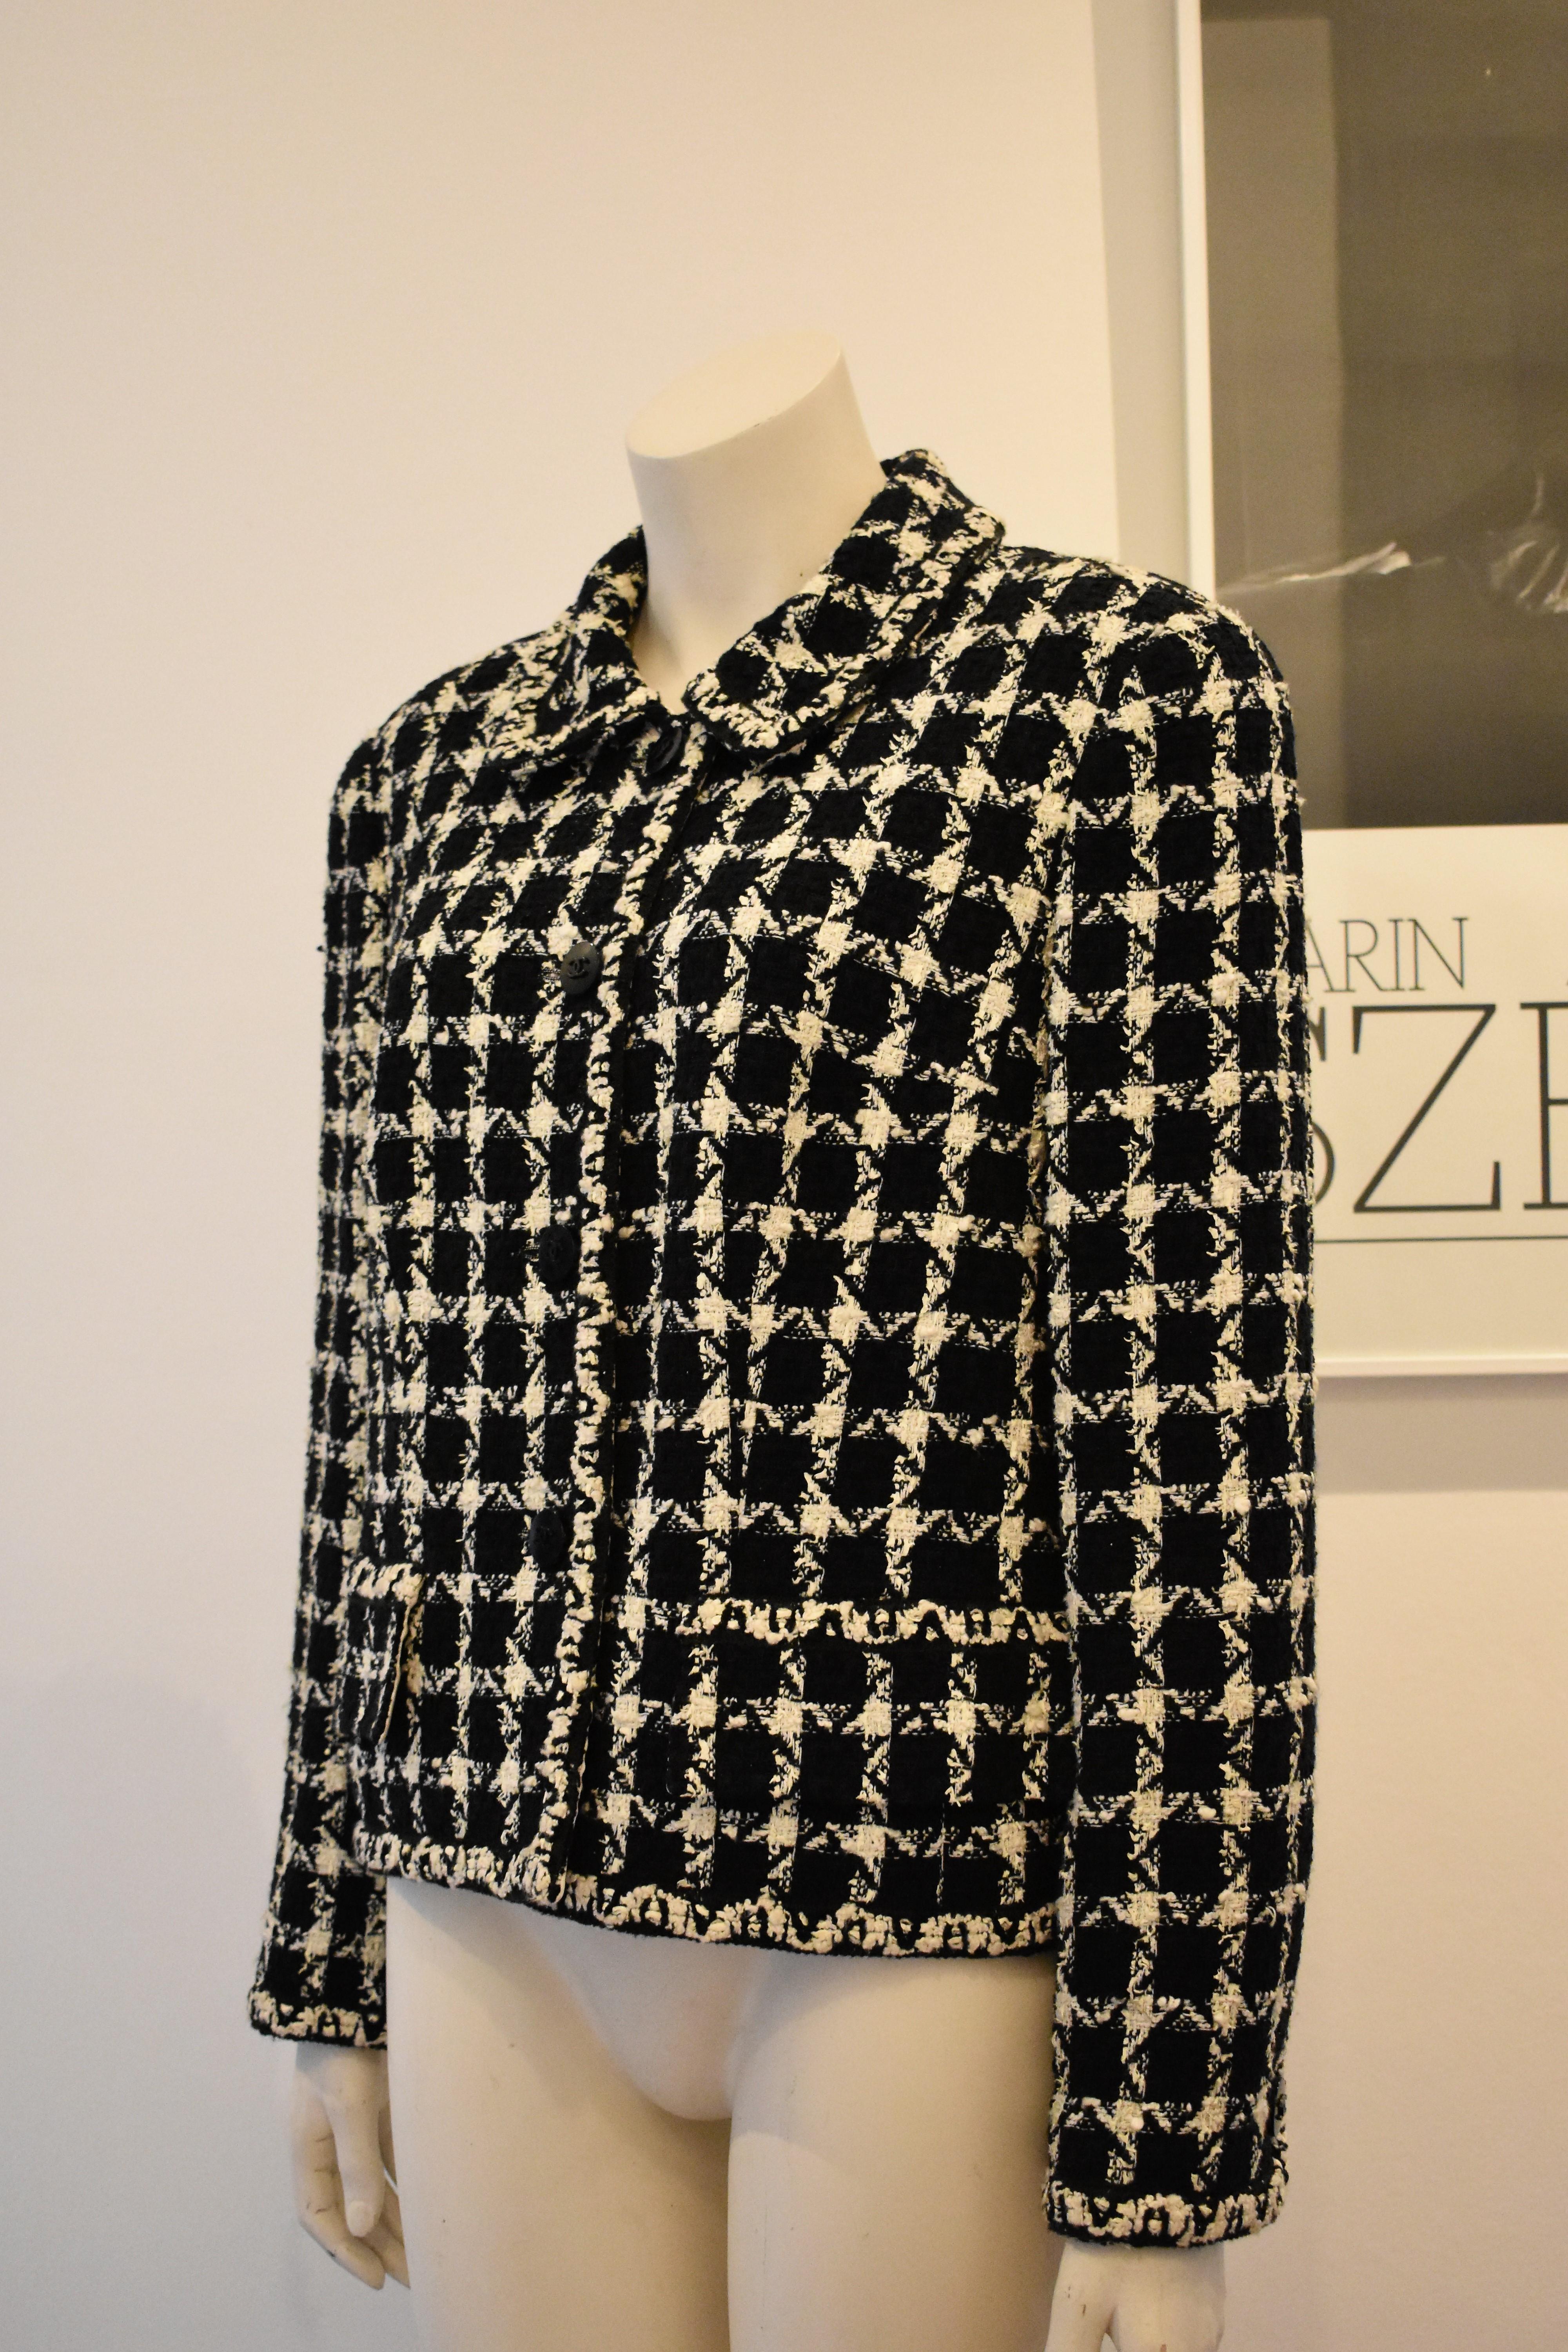 Women's Chanel Classic Houndstooth Boucle Jacket in Black and White, 1998C